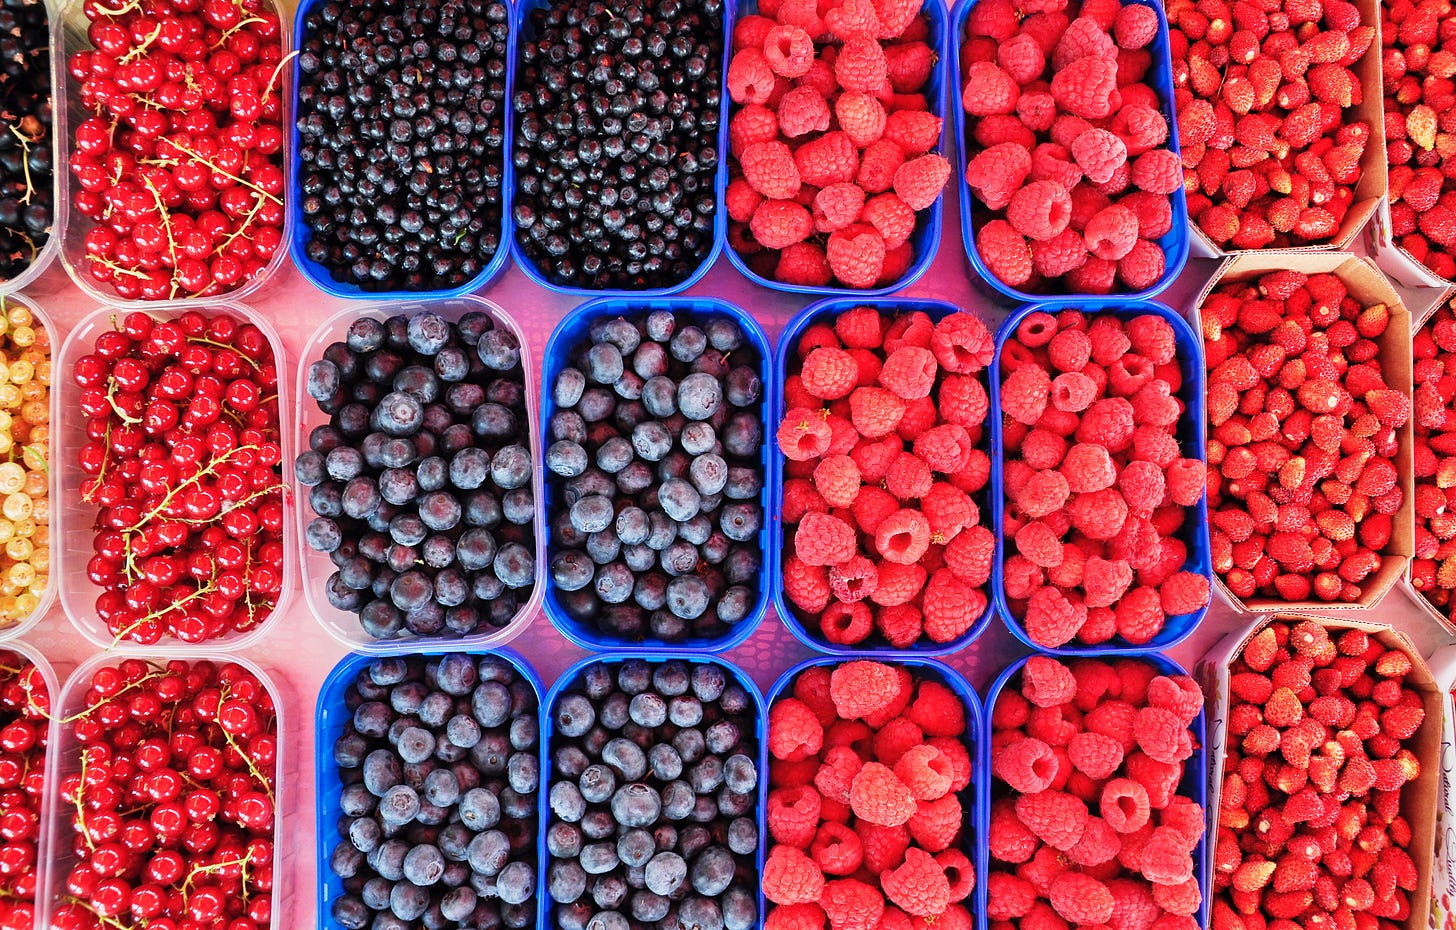 Photo of various types of berries divided into separate containers. Photo by Alex Block on Unsplash.